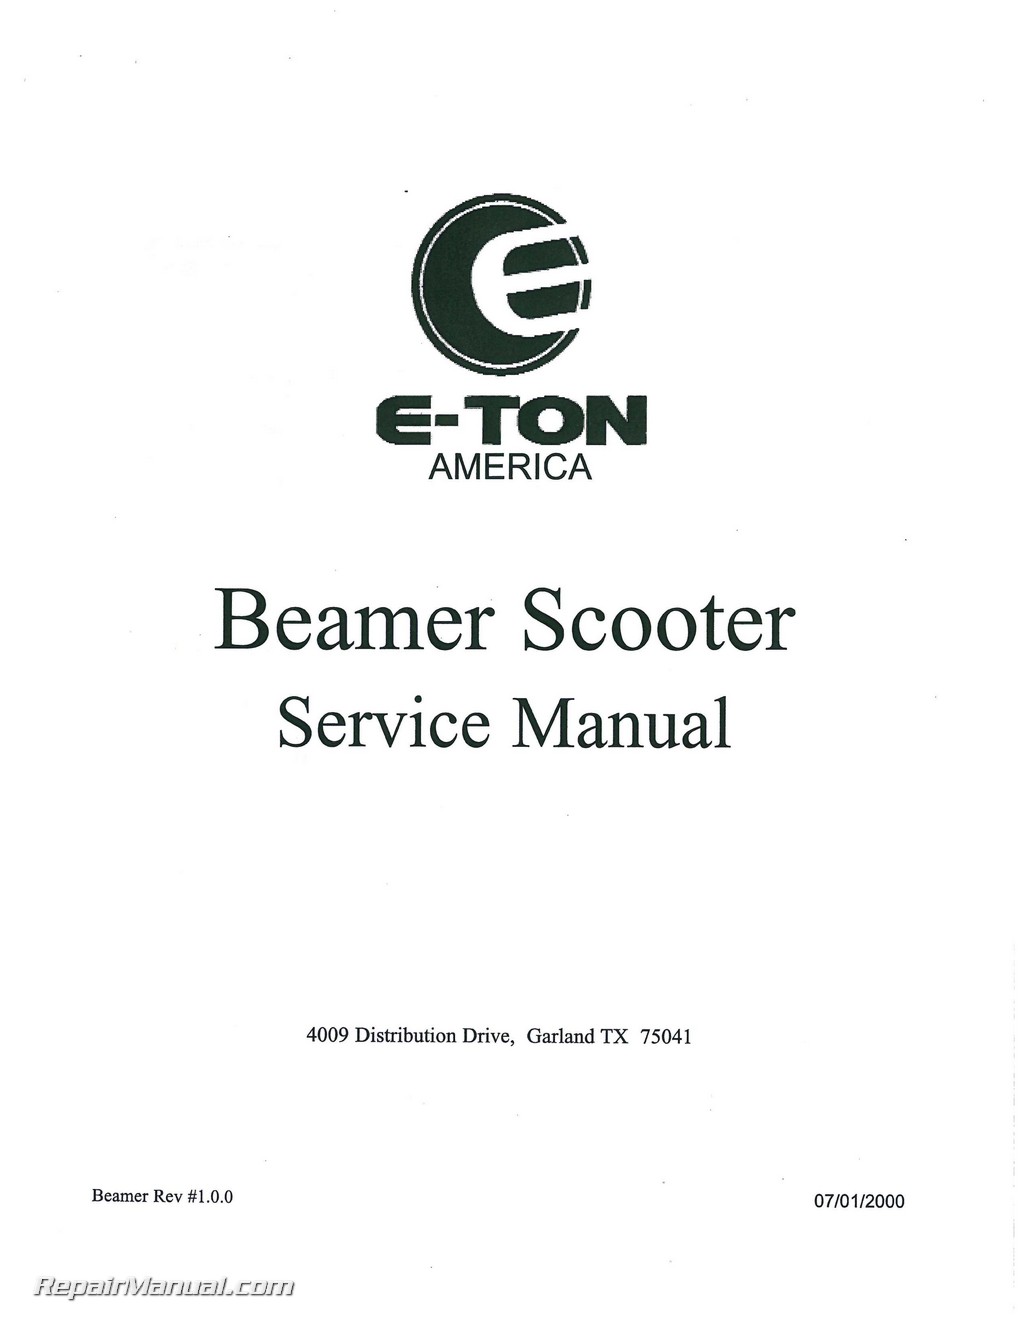 Beamer Scooter Service Manual